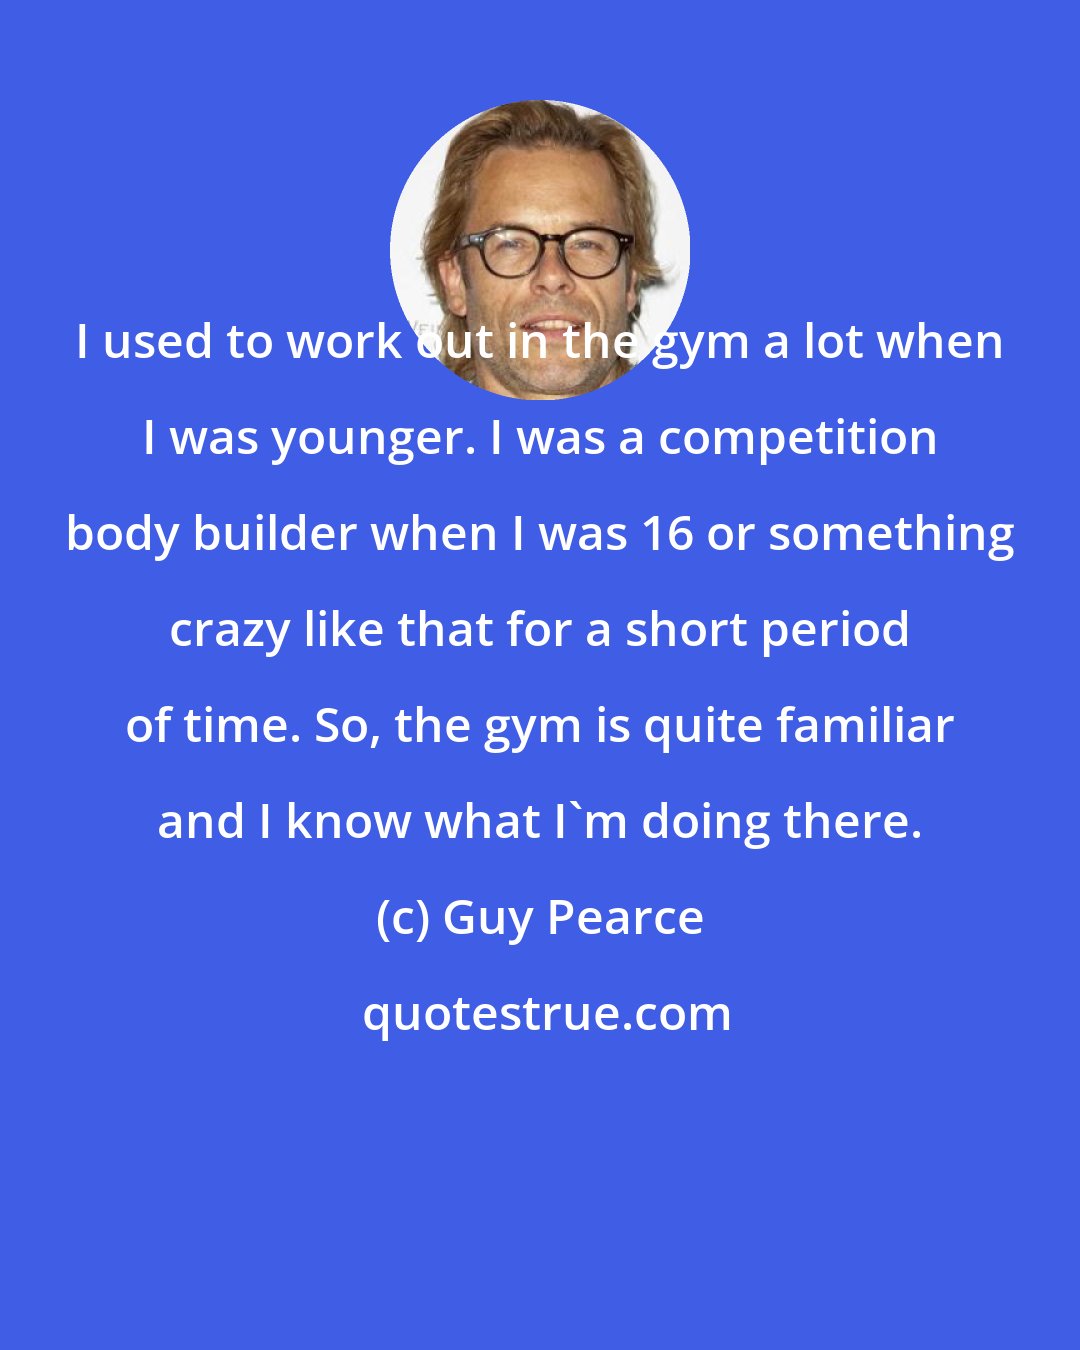 Guy Pearce: I used to work out in the gym a lot when I was younger. I was a competition body builder when I was 16 or something crazy like that for a short period of time. So, the gym is quite familiar and I know what I'm doing there.